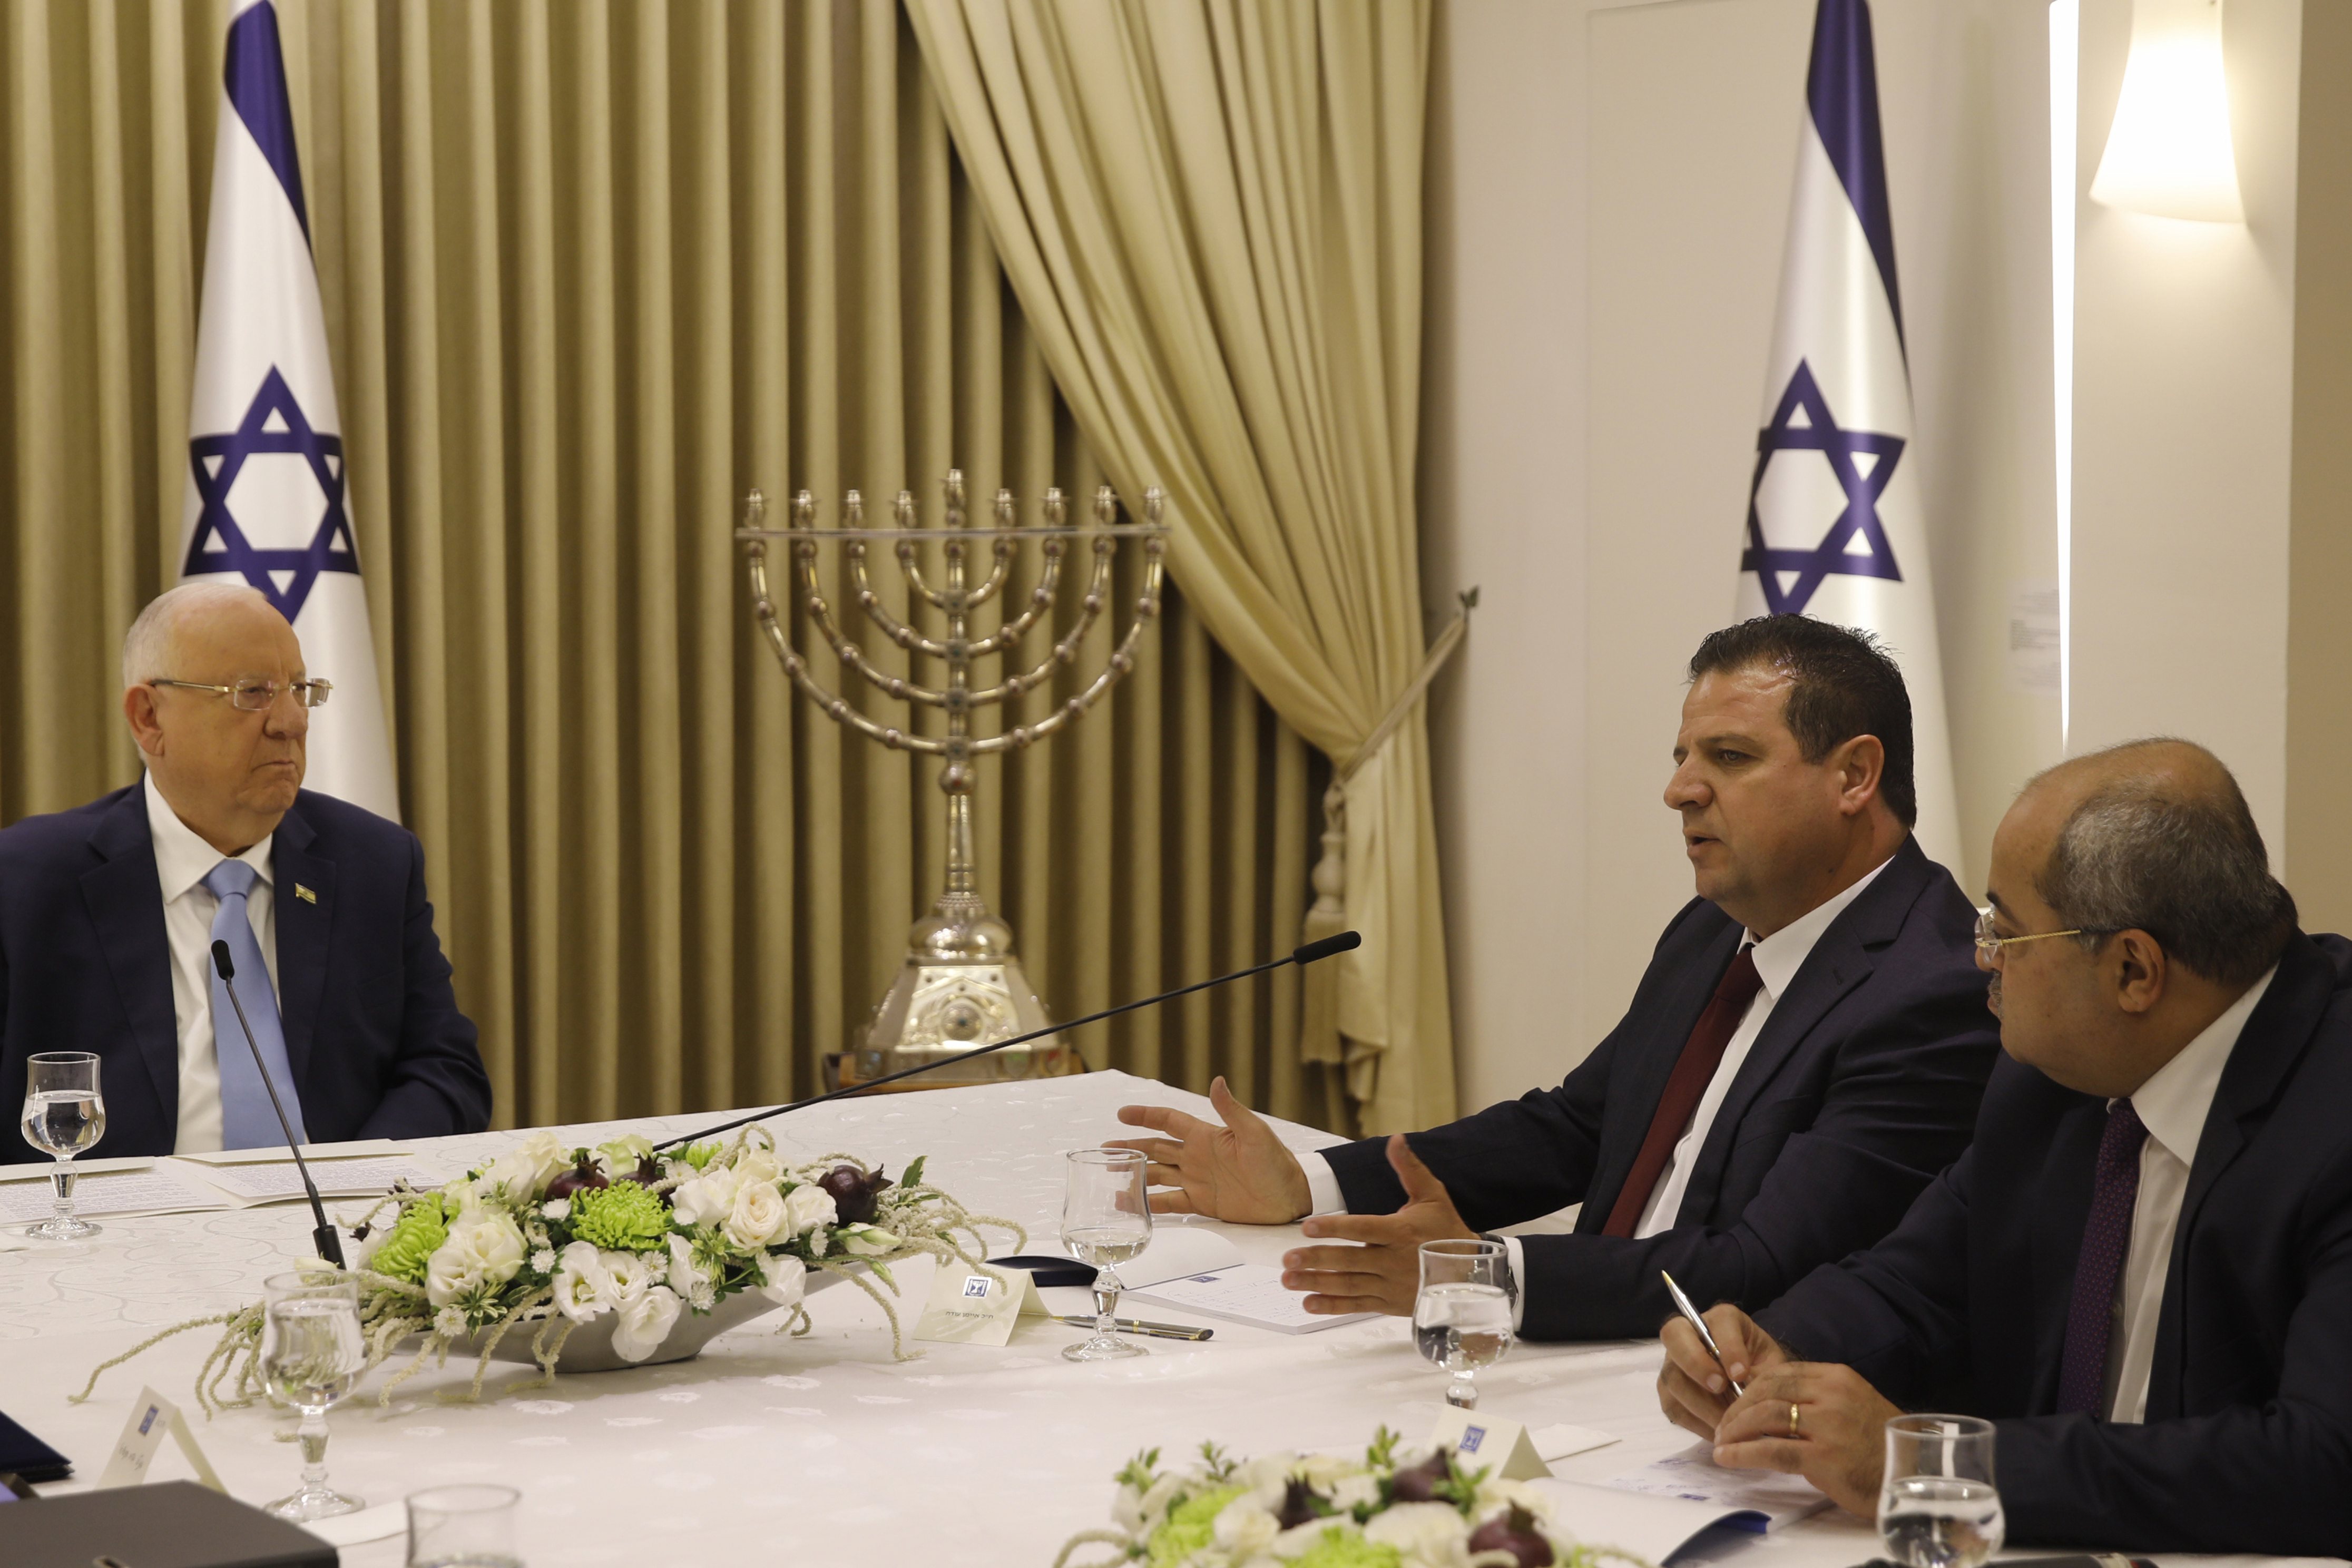 Israeli President Reuven Rivkin meets with Arab Joint List leader Odeh for his recommendation on who should become Israel’s next Prime Minister. For the first time in a quarter-century, the Arab leadership endorsed a Jewish candidate, Benny Gantz.